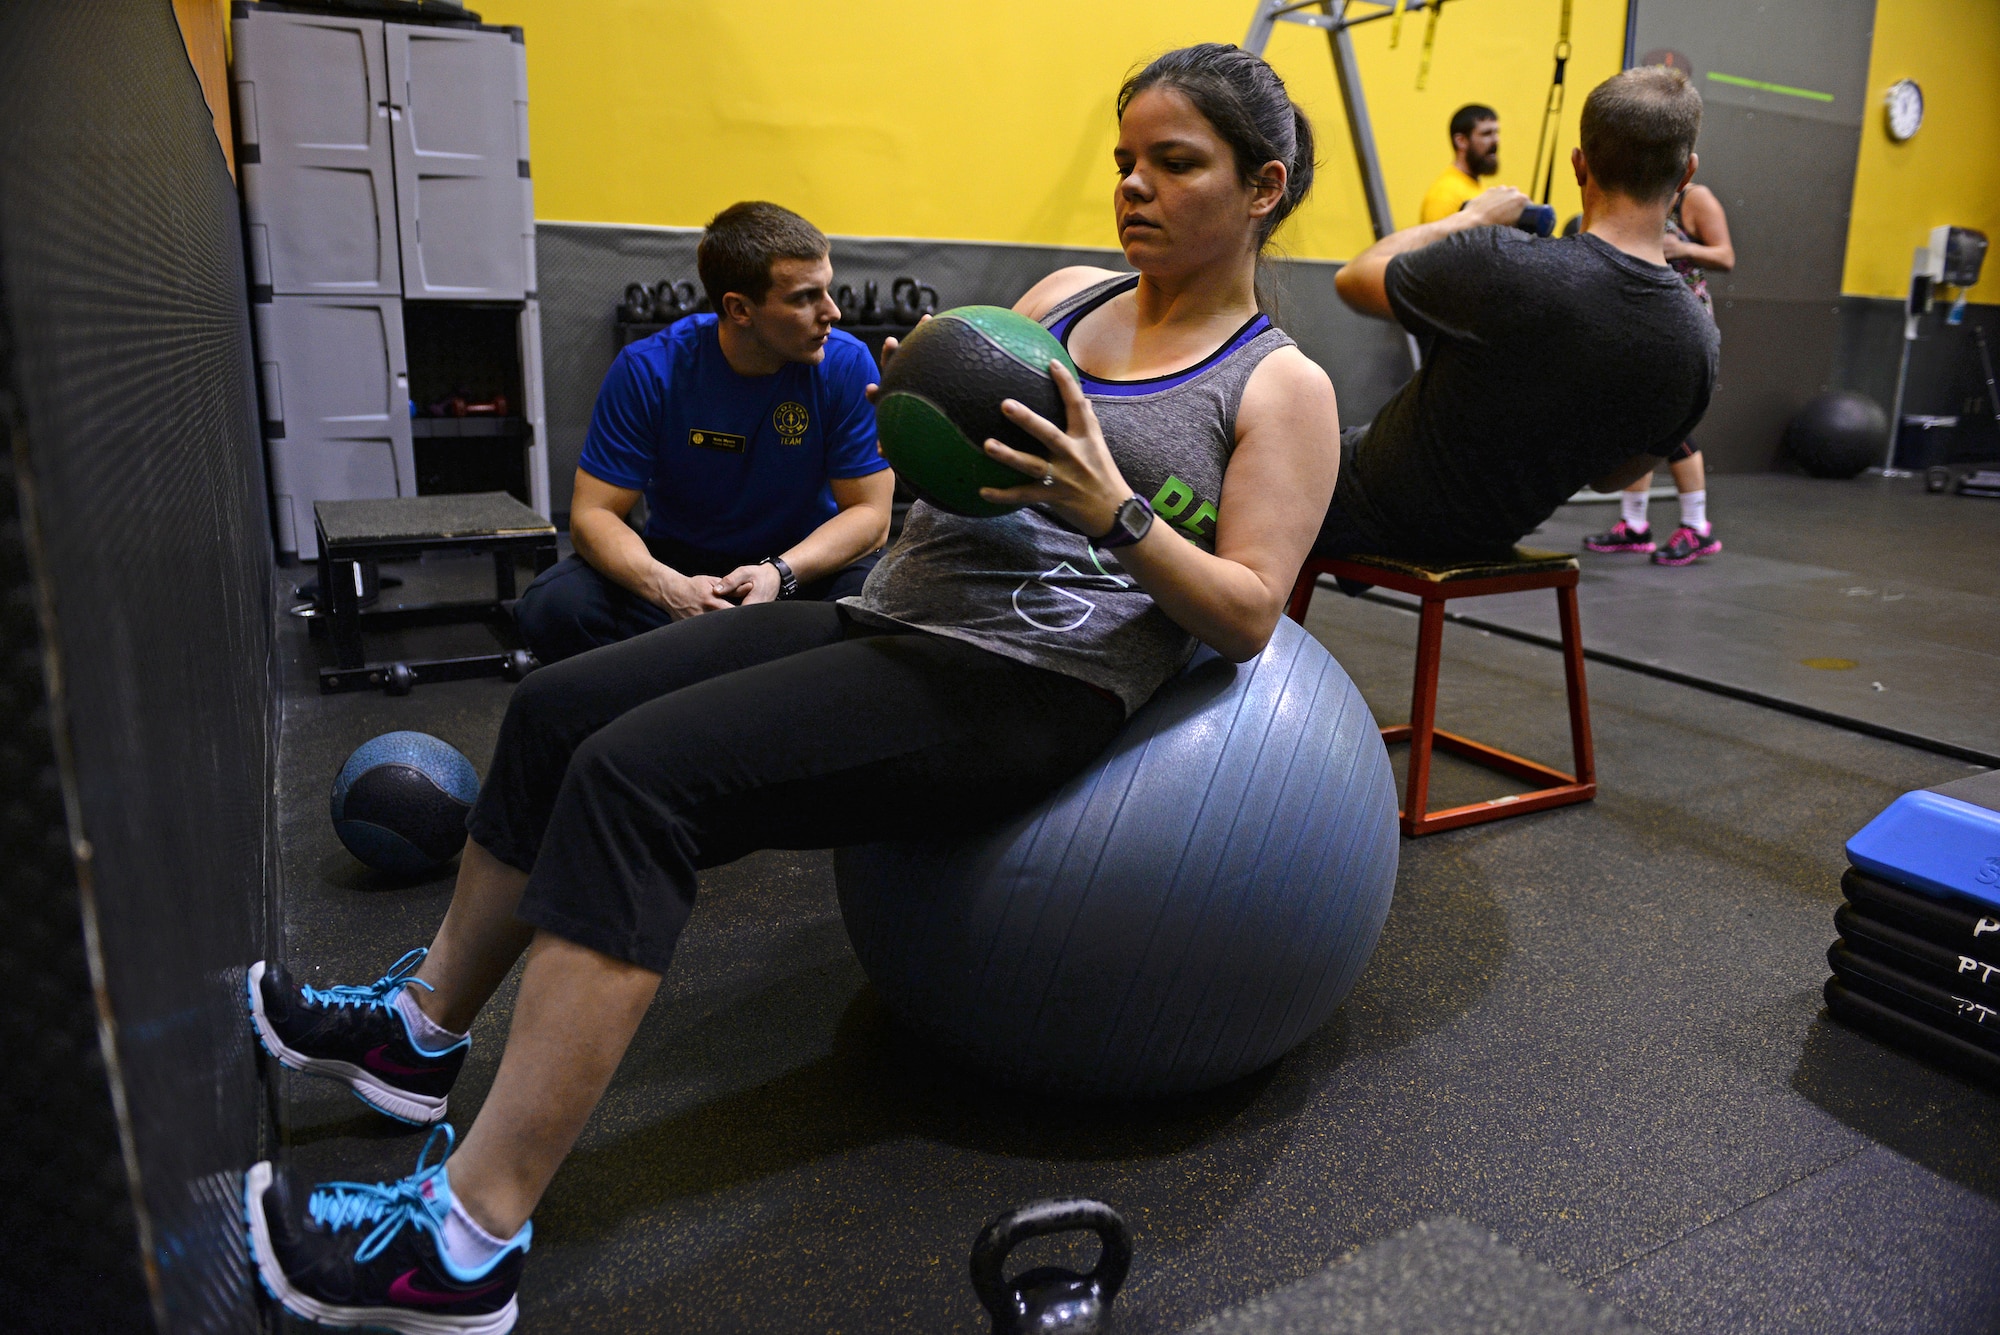 Jessi McNulty, 26, performs an abdominal exercise, ‘russian twists’, while her personal trainer Nate Myers supervises her for correct form, O’Fallon, Ill., Jan. 22, 2015. This Air Force spouse has been hitting this gym for nearly two years, during which time she has lost 90 pounds despite having temporal lobe epilepsy. Generally her workouts are total body-oriented. She and Myers monitor her heart rate to mitigate her seizures, which are exercise-induced. (U.S. Air Force photo by Airman 1st Class Erica Crossen)